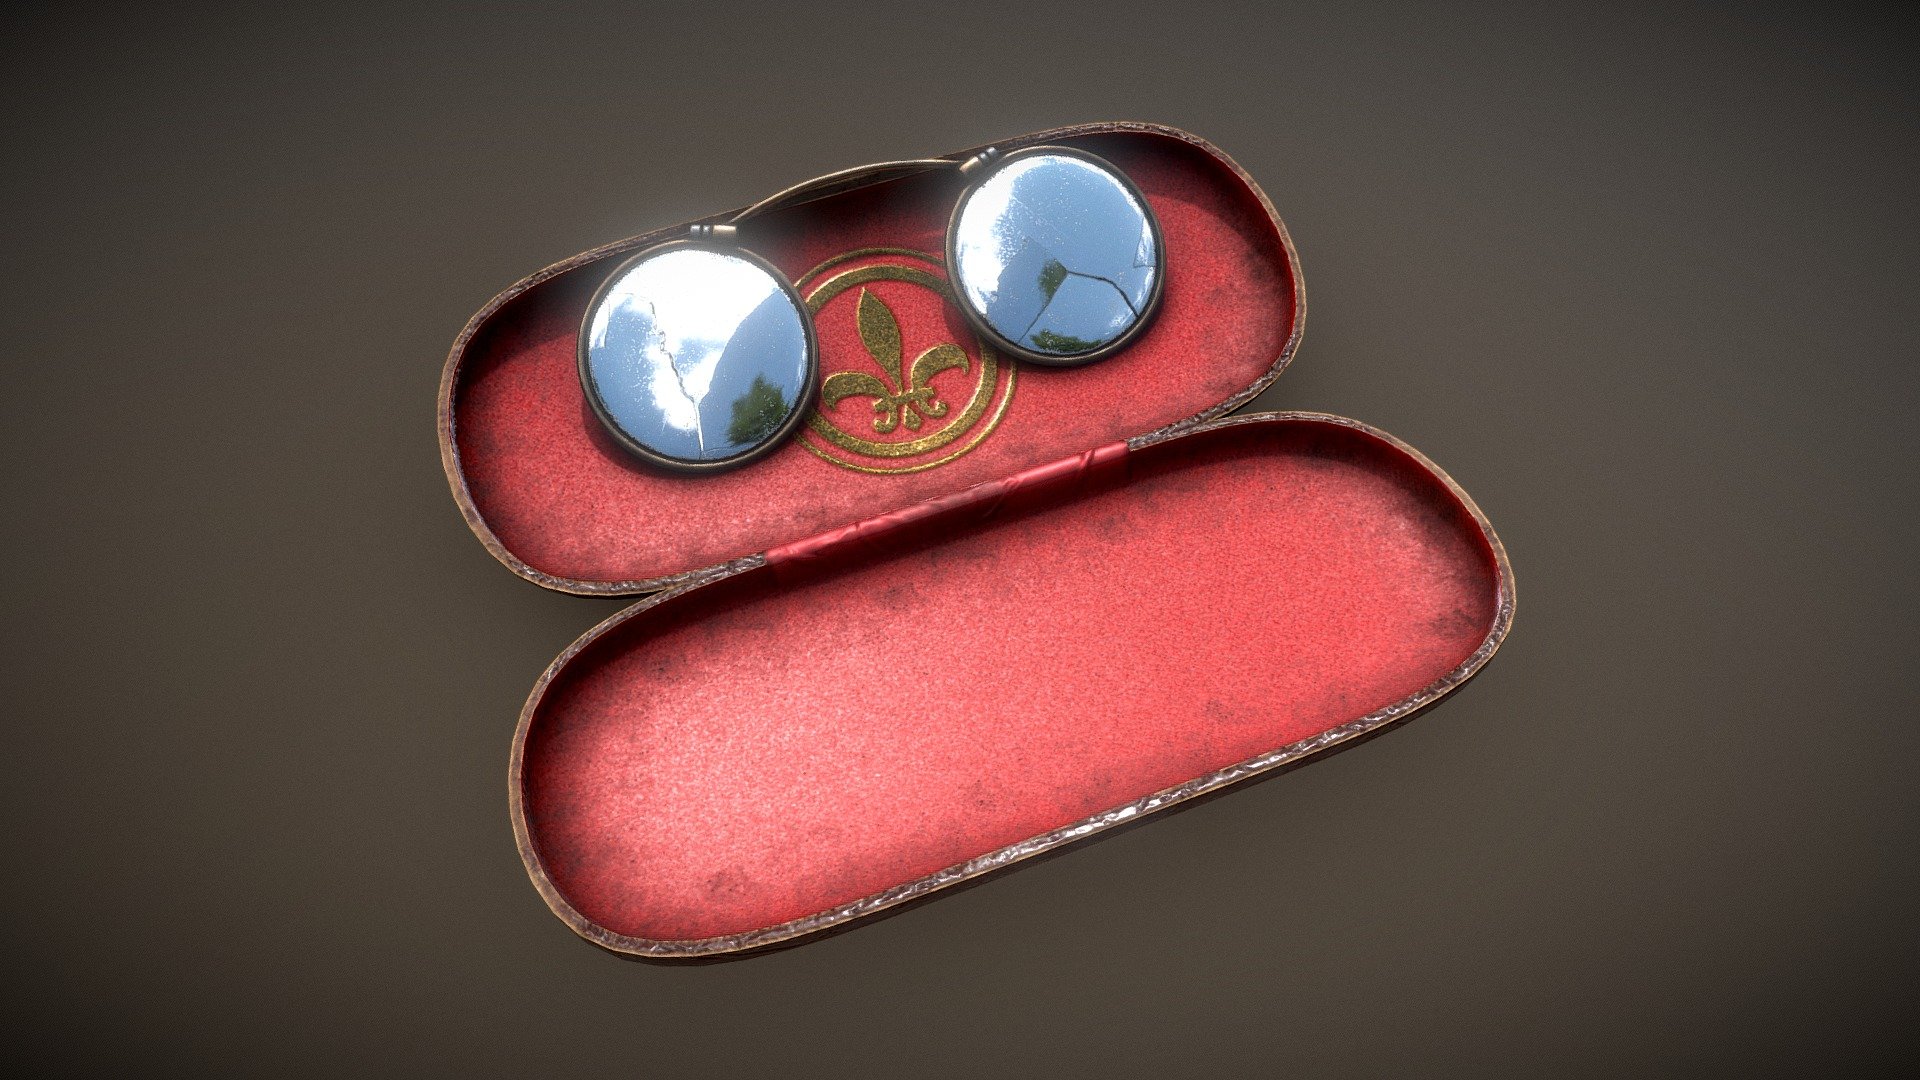 Another model for my Weekly CGC #126 submission; A pair of special glasses in their case 3d model